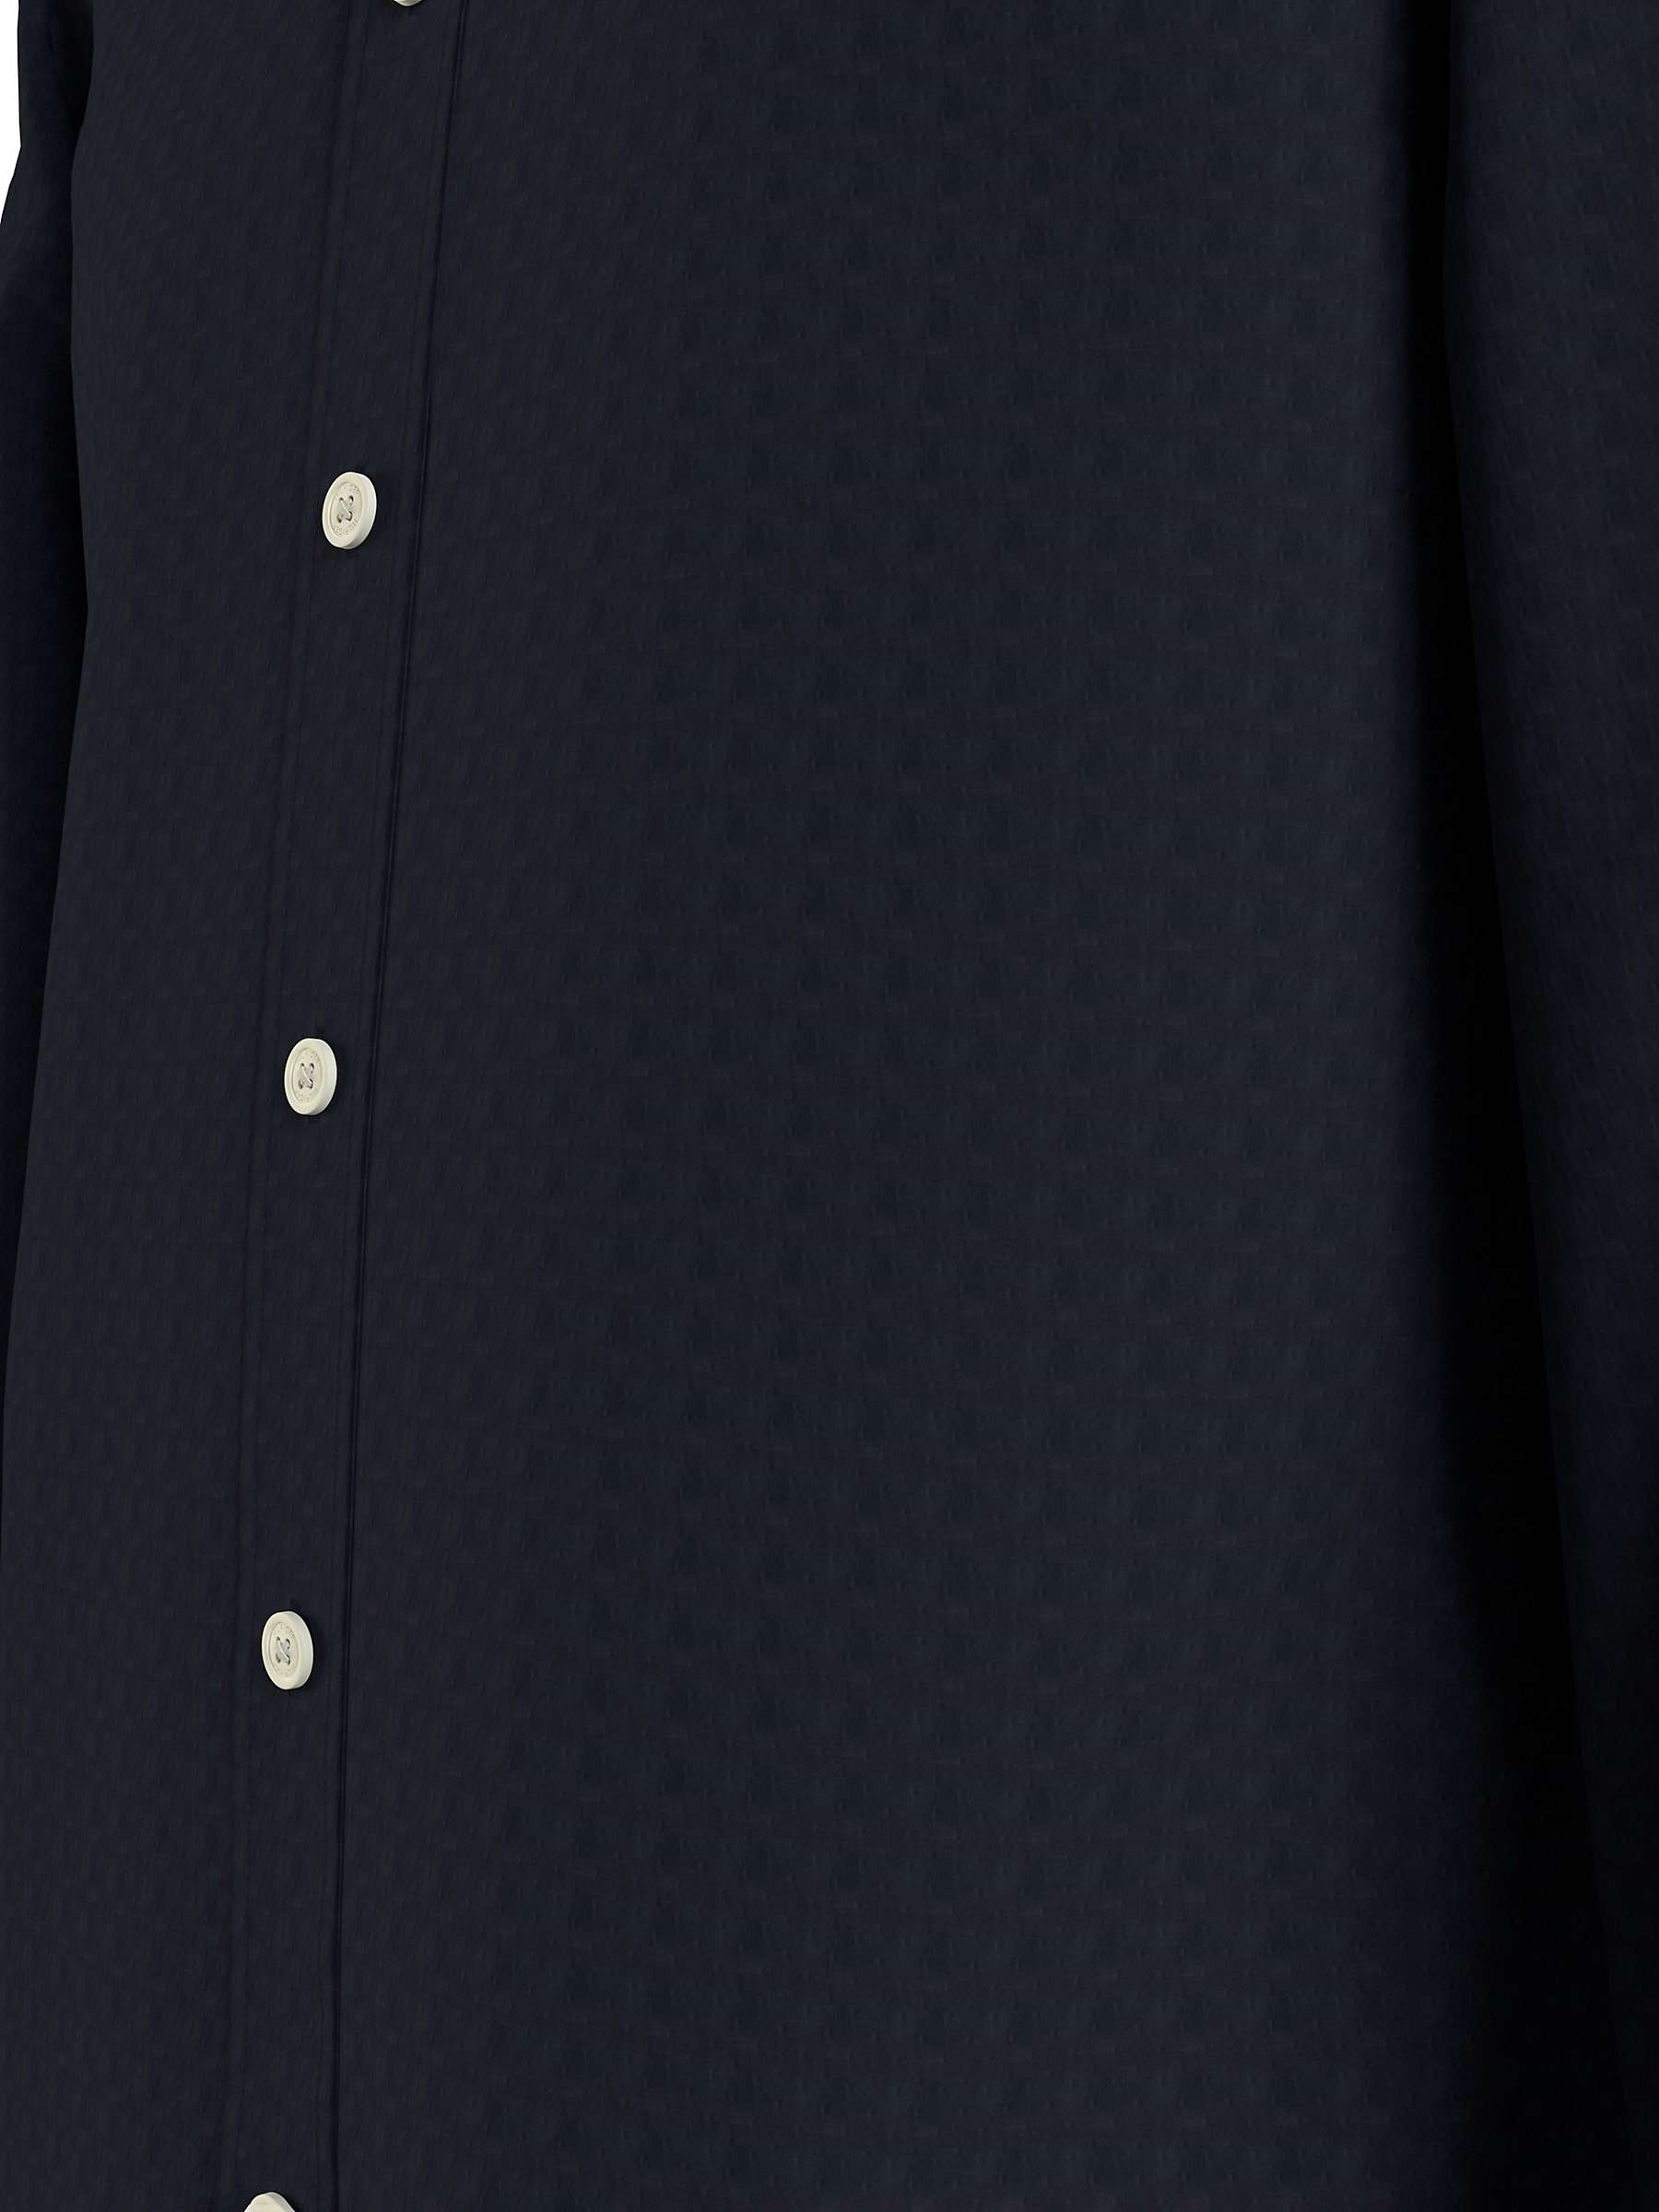 Buy Tommy Hilfiger Oxford Dobby Long Sleeve Shirt, Navy Online at johnlewis.com